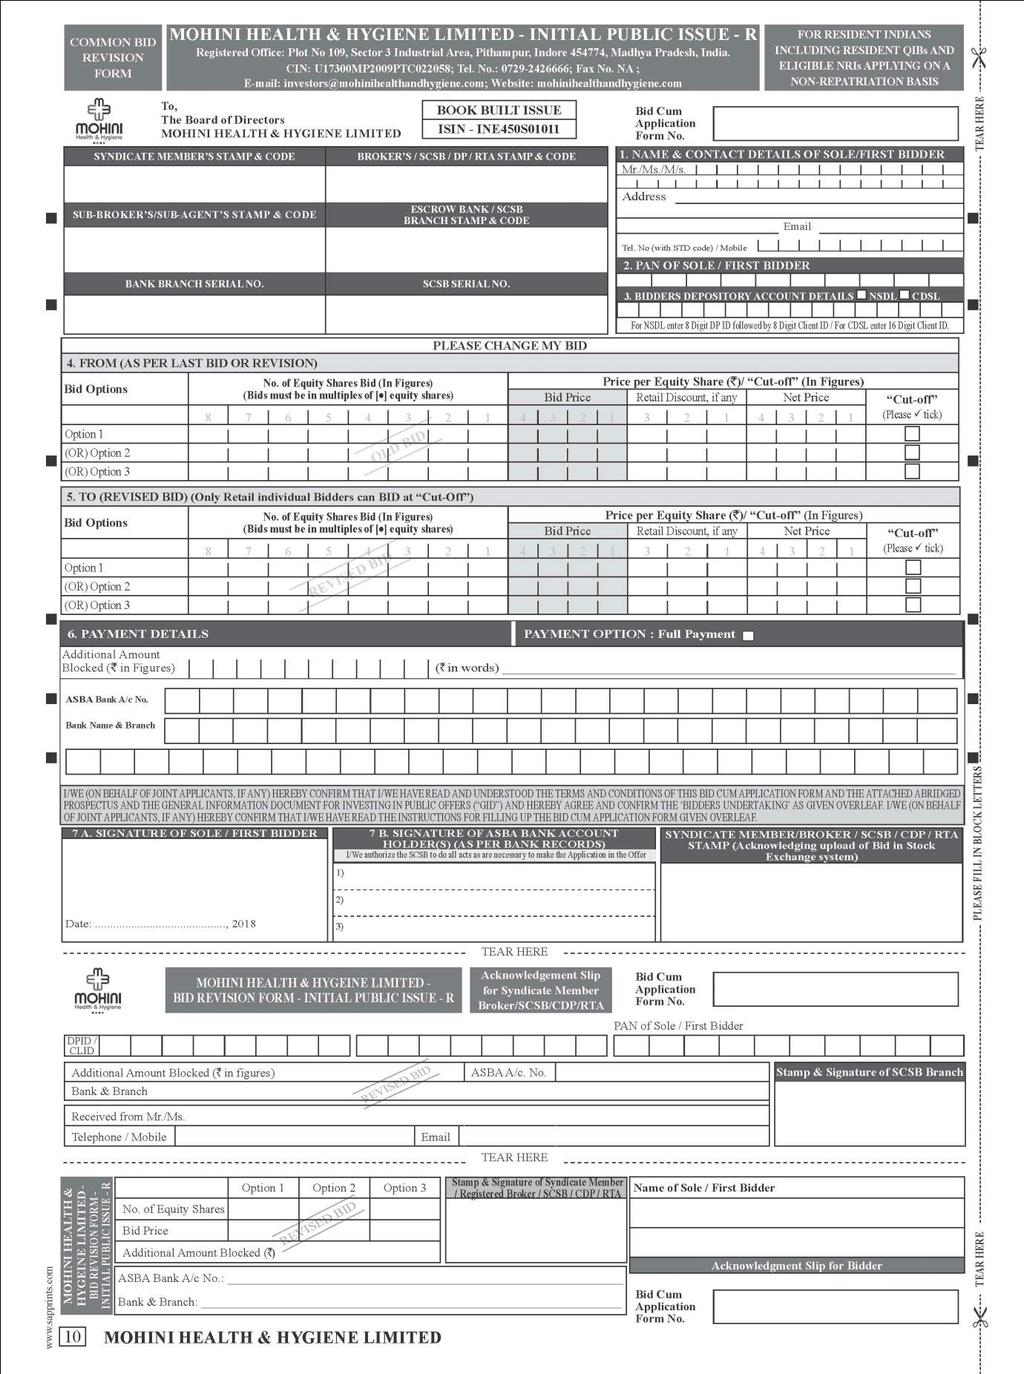 A sample Revision form is reproduced